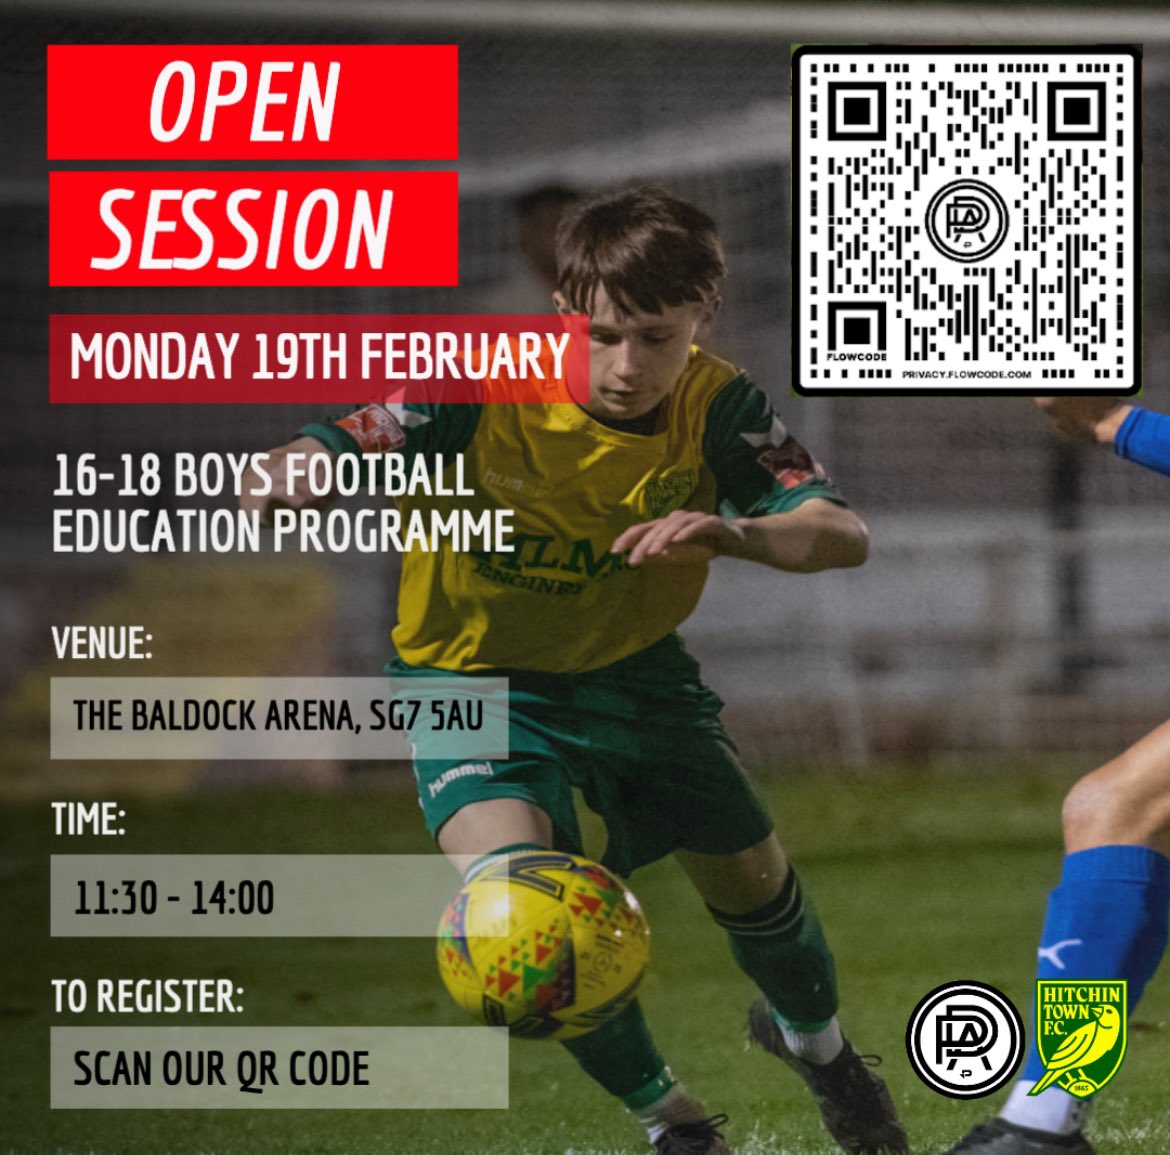 Open Session ⚽️ We’re hosting another open session in the February half-term 🤗 All details are below, scan the QR code to register your details ✍️